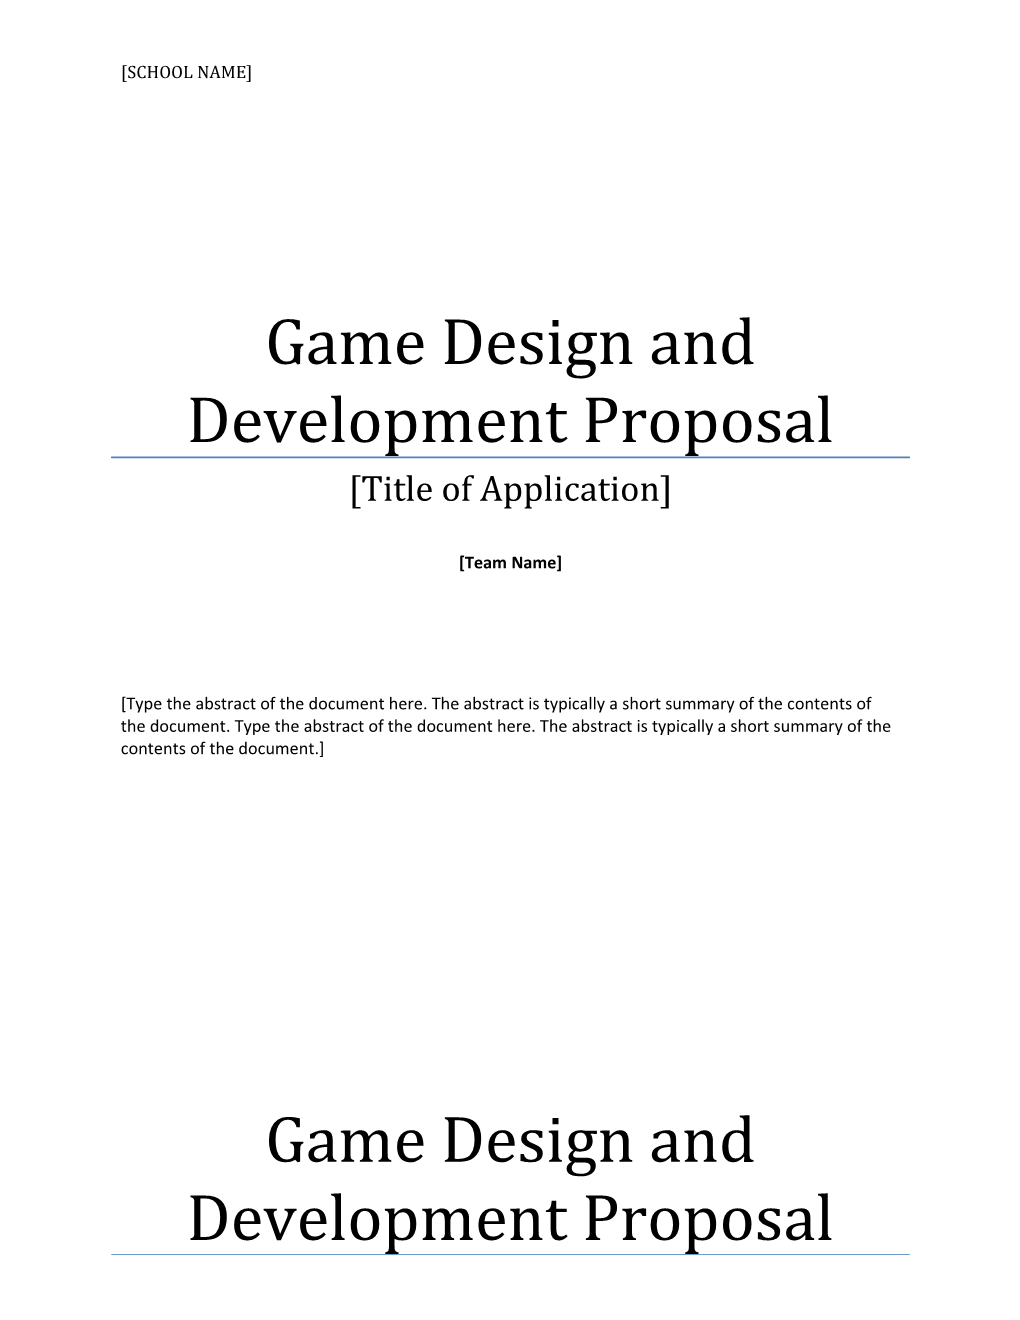 Game Design and Development Proposal